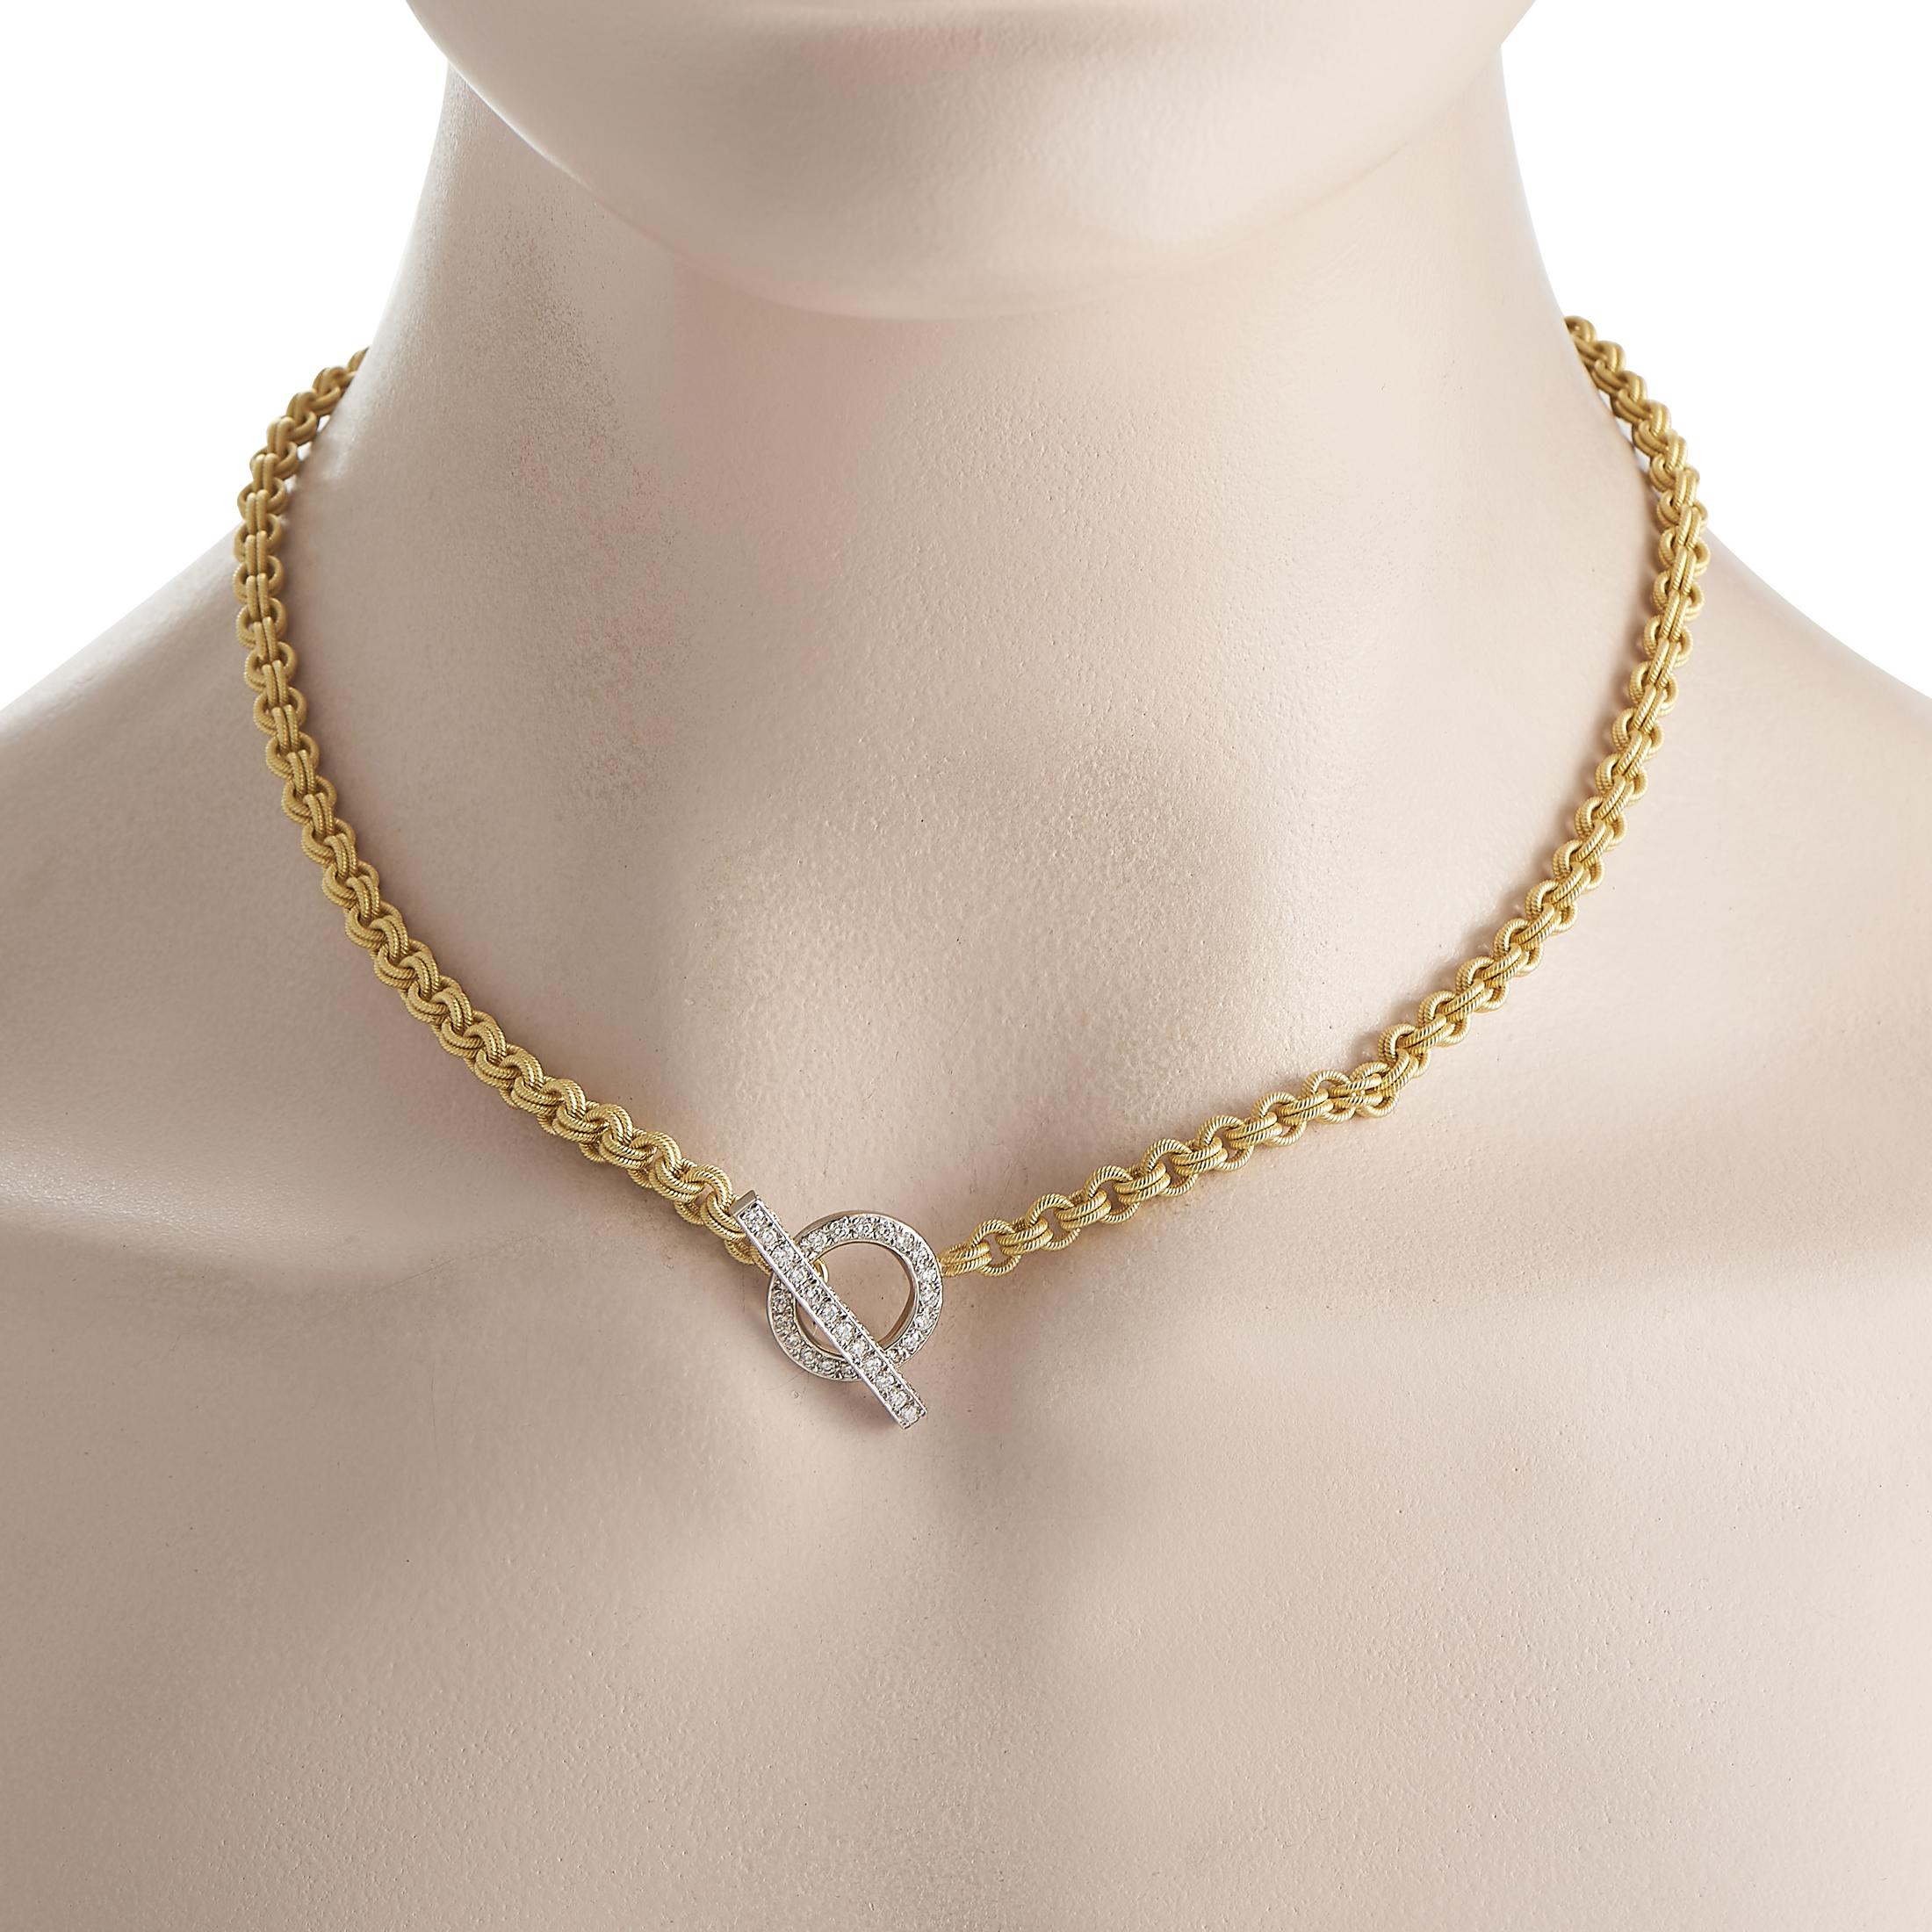 This necklace allows you to switch looks effortlessly. It is made of 18K yellow gold and features a diamond-encrusted bar-and-ring clasp. The toggle clasp doubles as a pendant, making it both functional and stylish. The necklace itself is made up of